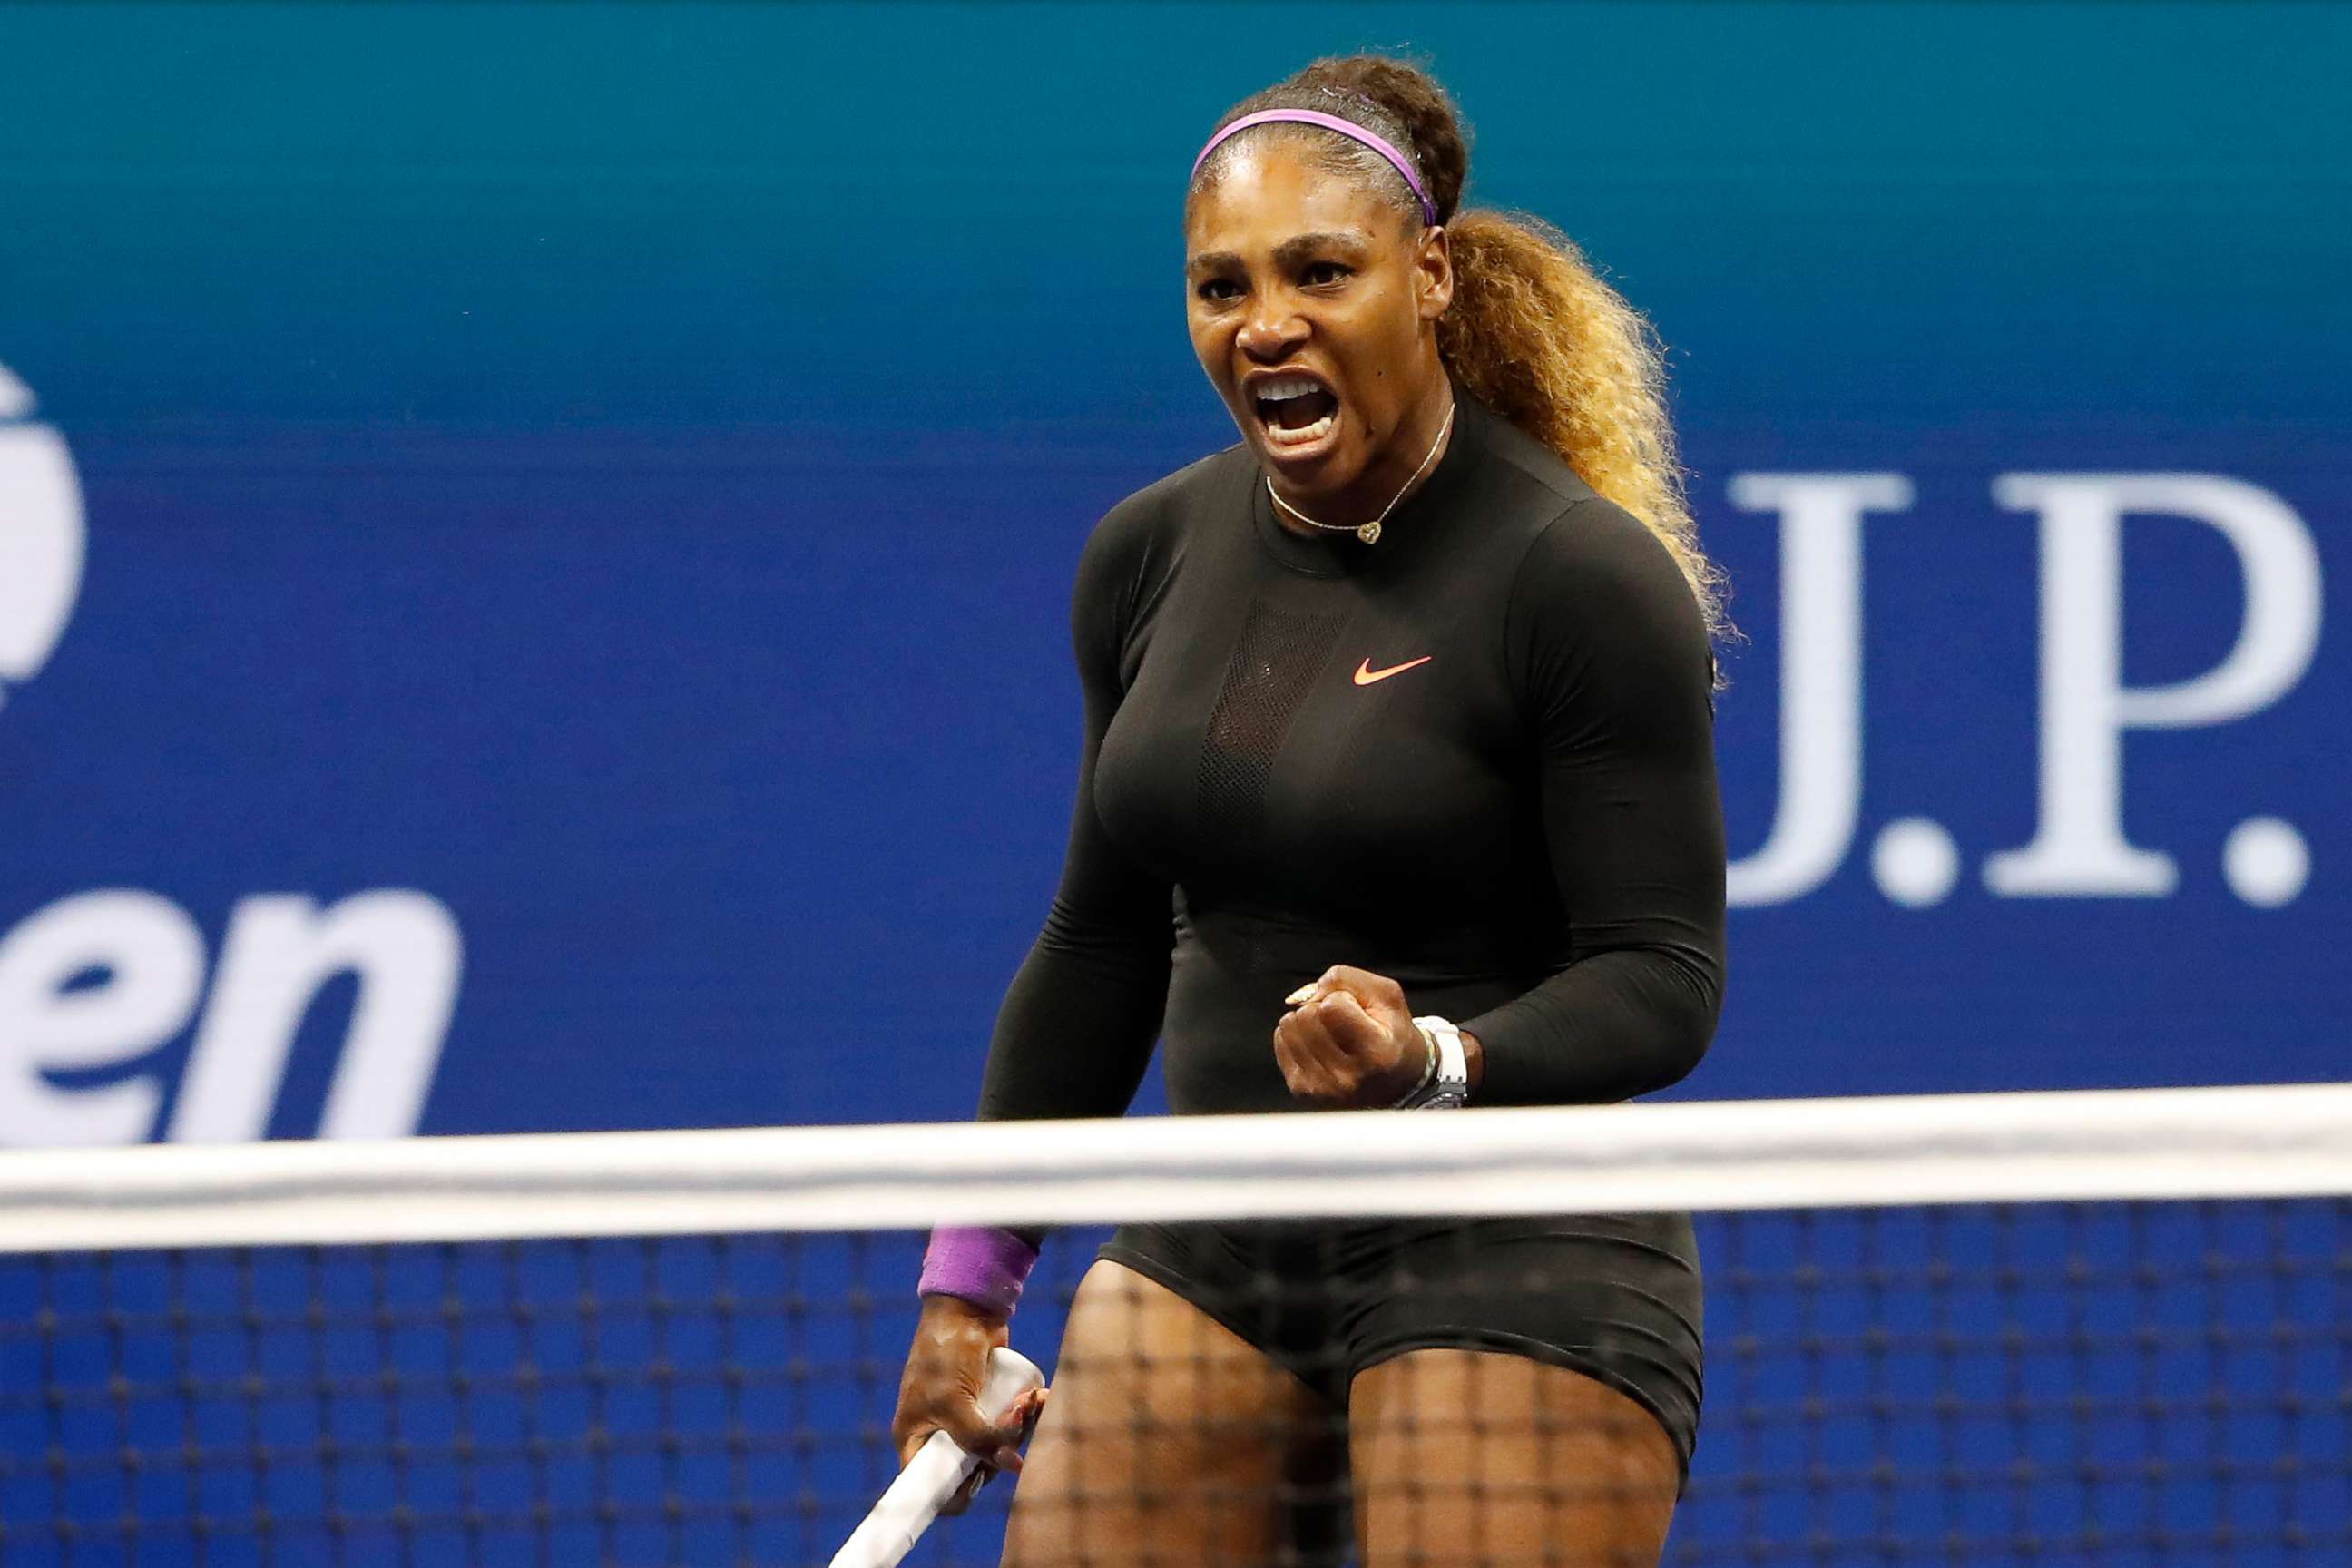 PHOTO: Serena Williams reacts after winning a point against Qiang Wang in a quarterfinal match on day nine of the 2019 US Open tennis tournament at USTA Billie Jean King National Tennis Center in Flushing, N.Y., Sep 3, 2019.